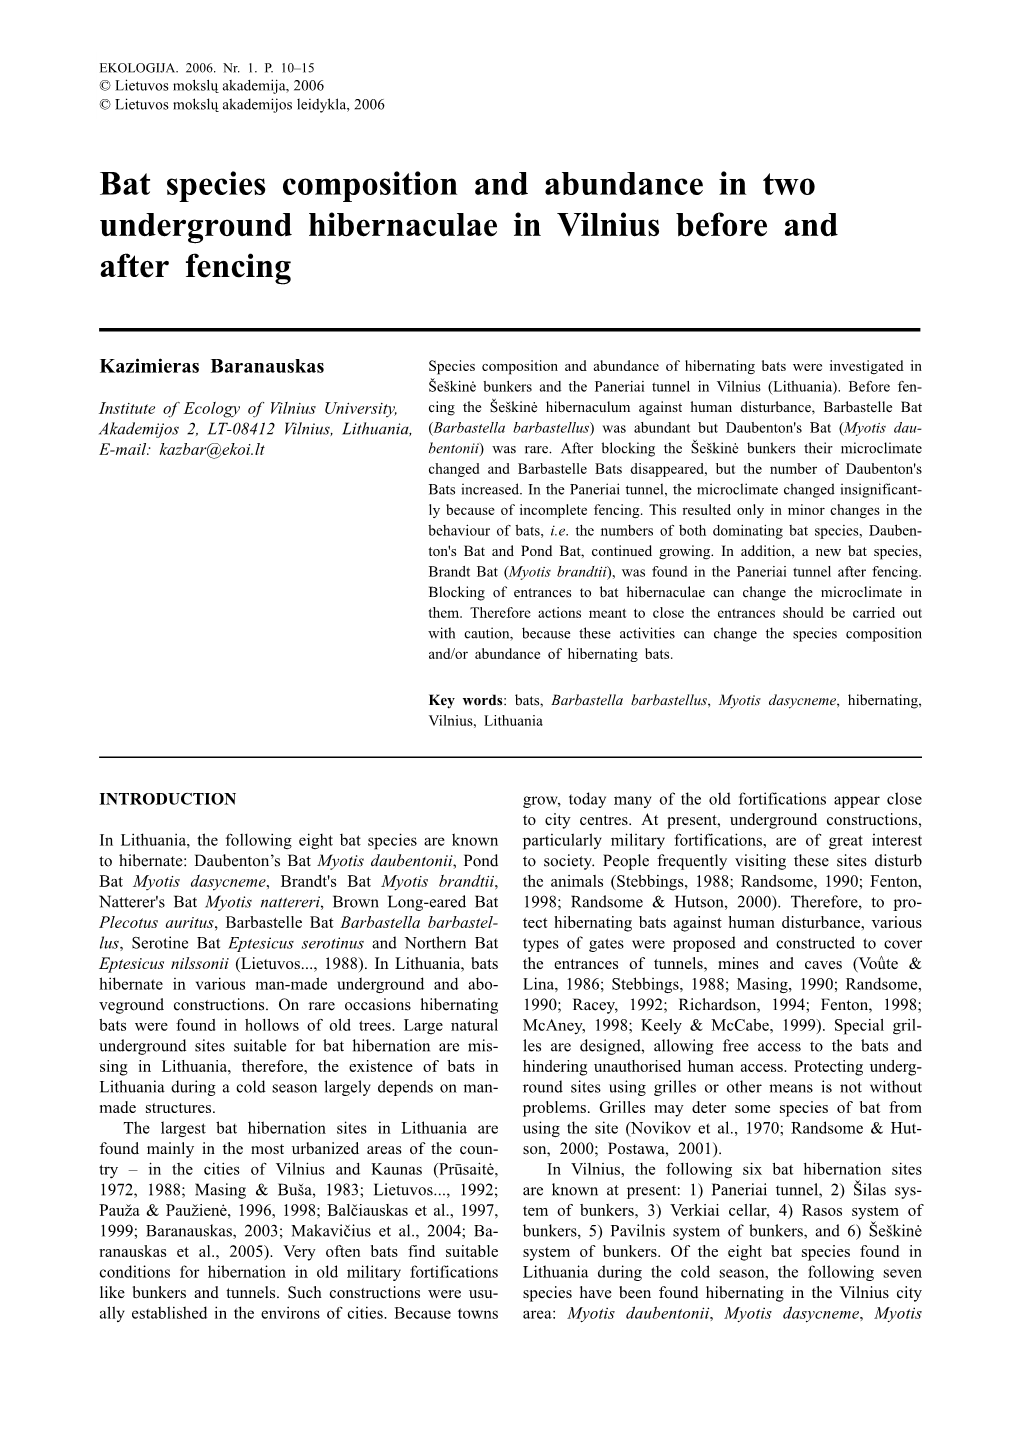 Bat Species Composition and Abundance in Two Underground Hibernaculae in Vilnius Before and After Fencing